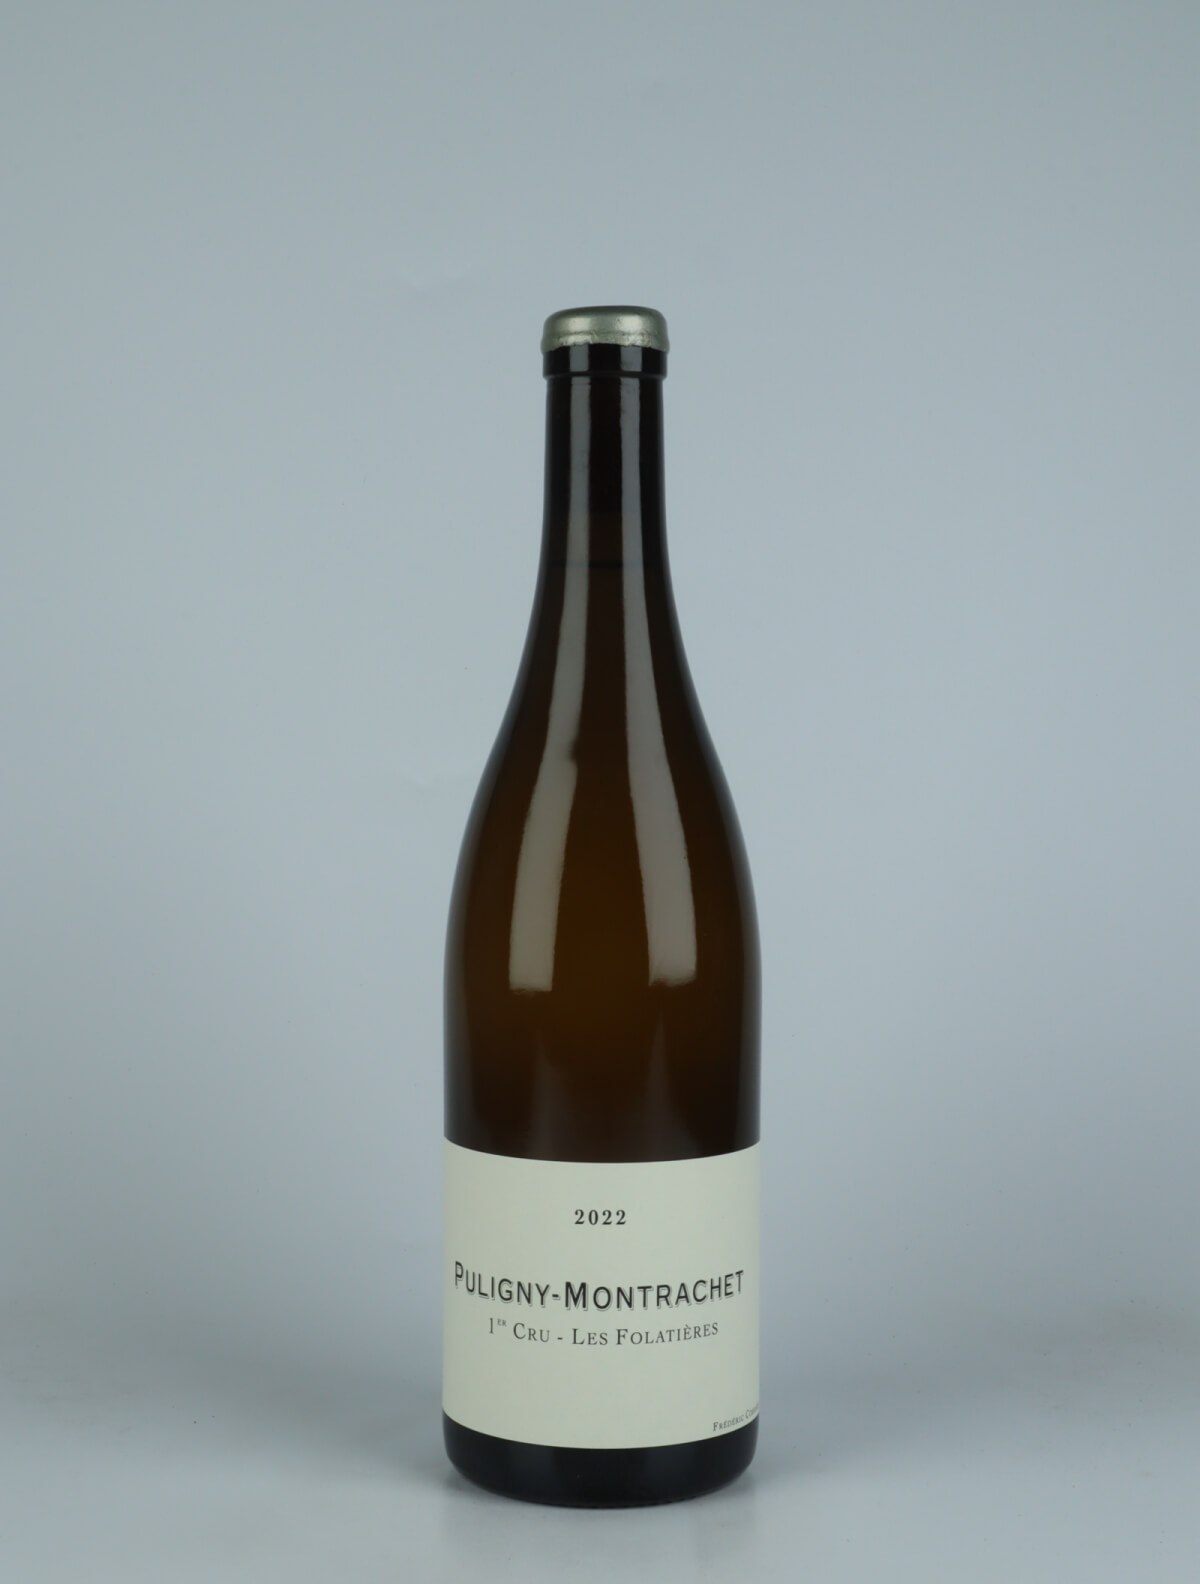 A bottle 2022 Puligny Montrachet 1. Cru - Folatières White wine from Frédéric Cossard, Burgundy in France